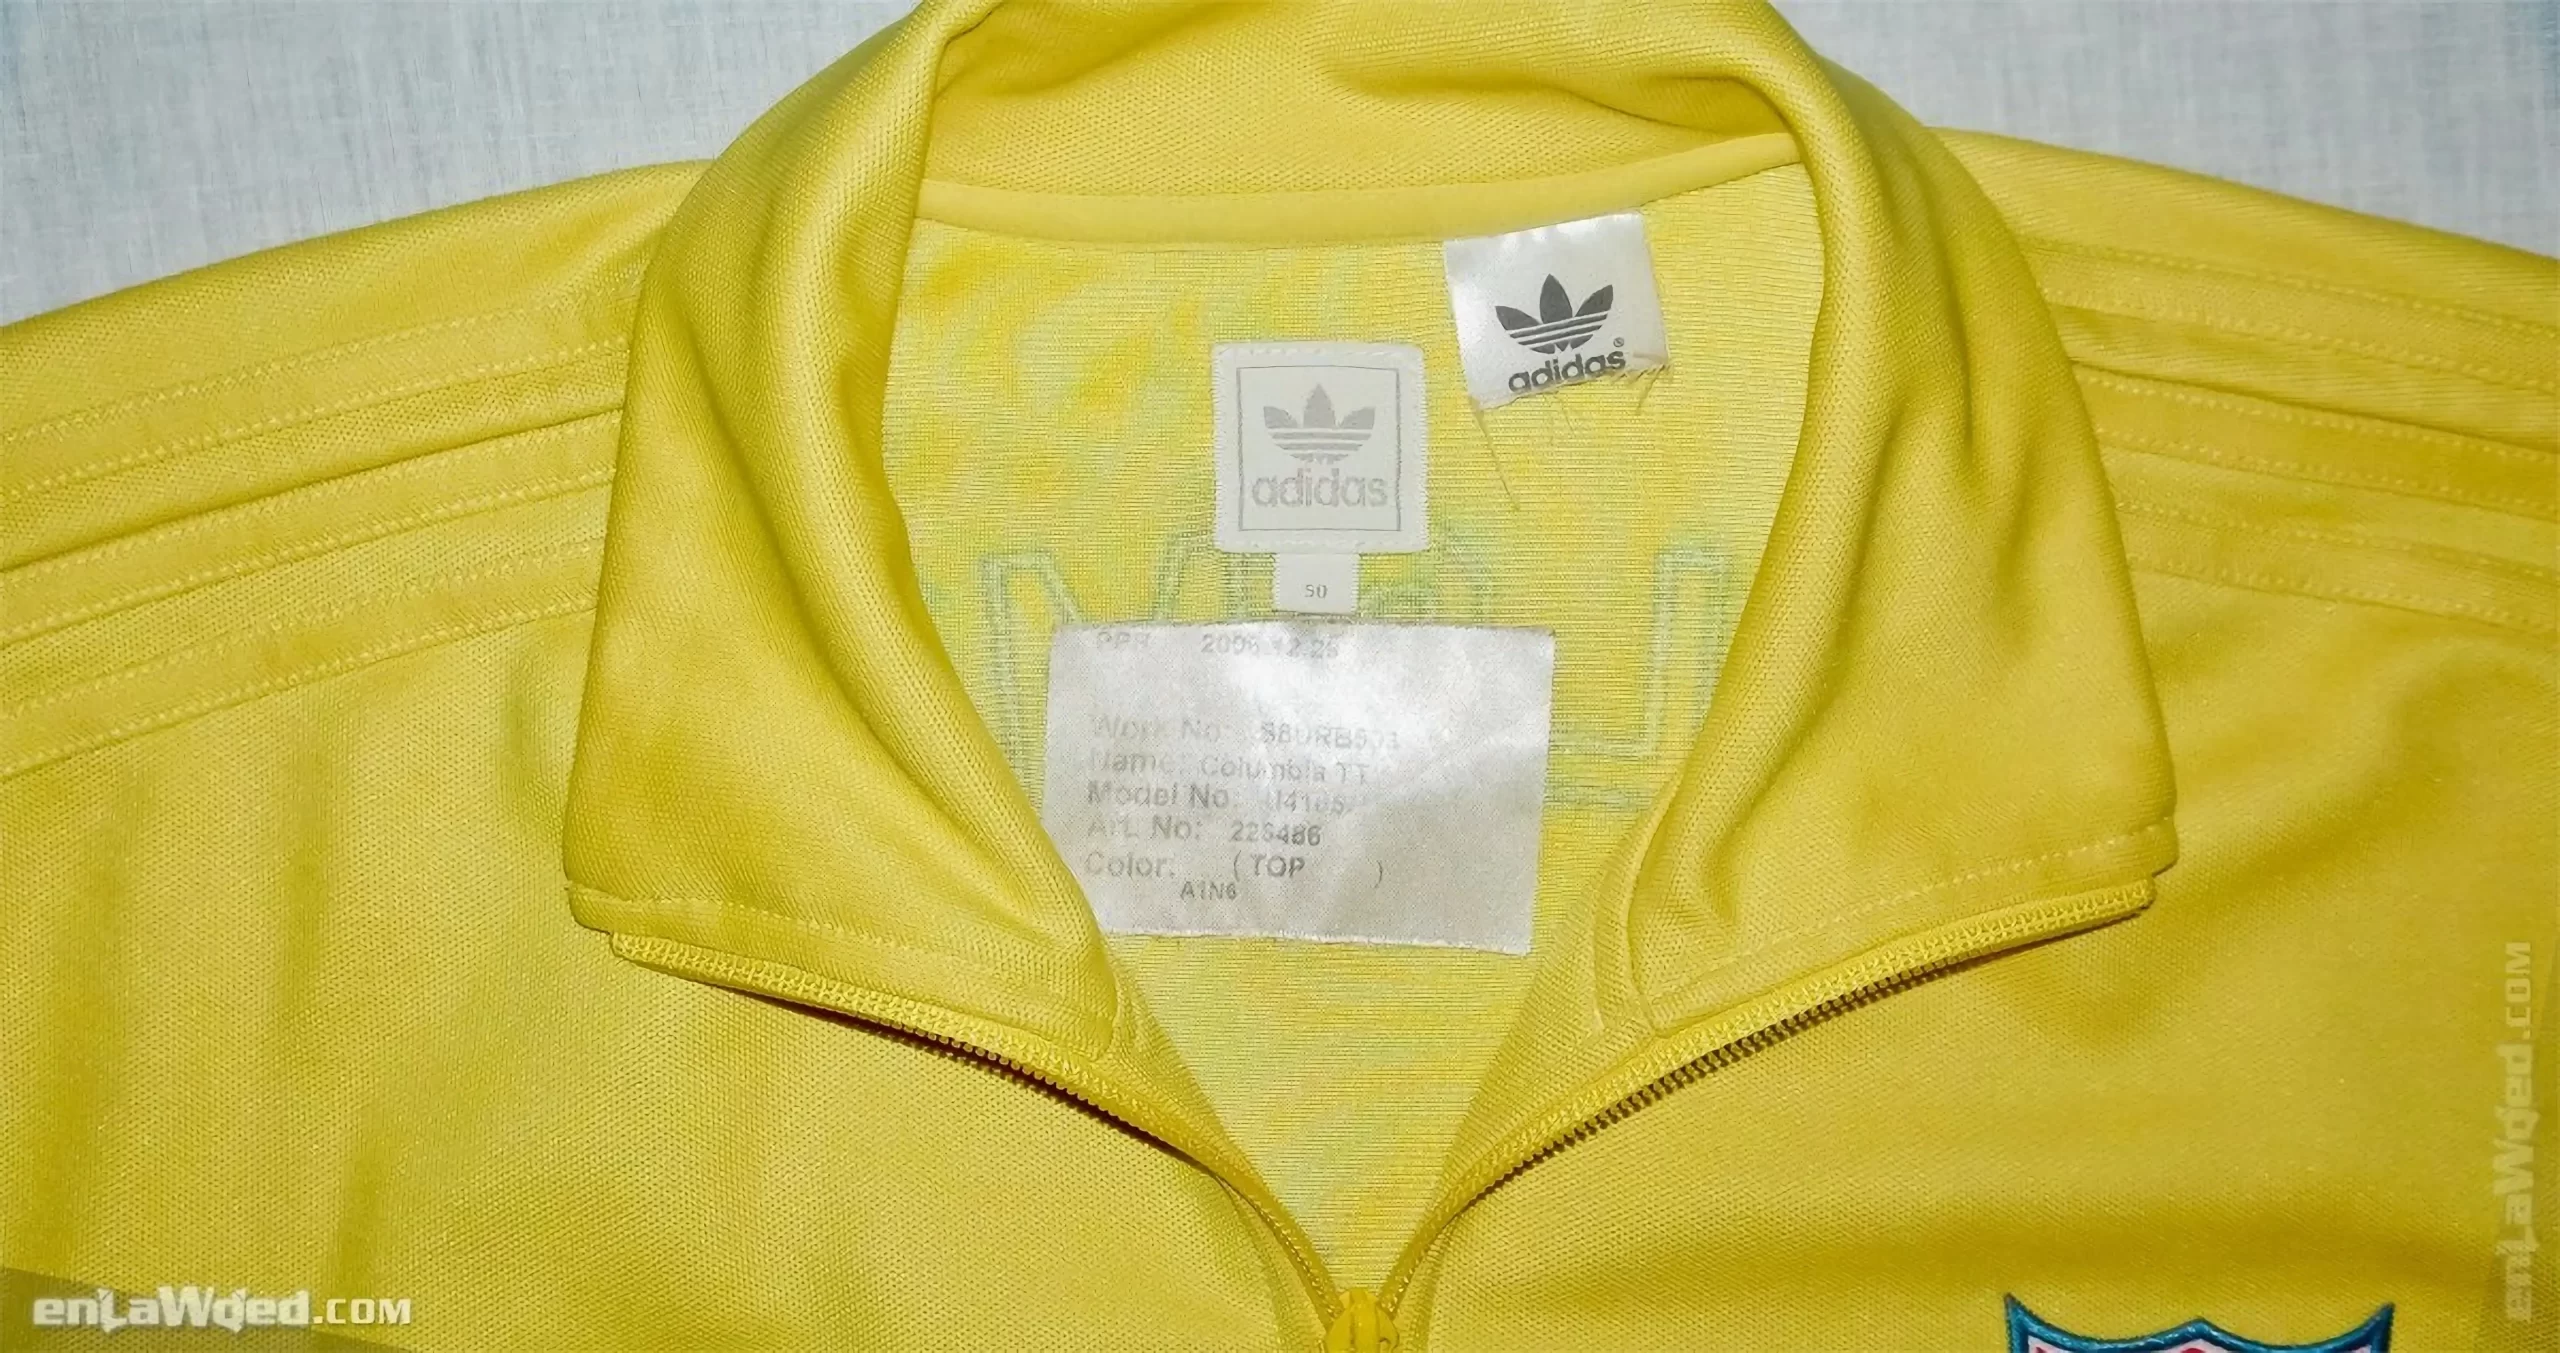 Adidas tag of the Colombia jacket, with the month and year of fabrication: 12/2006